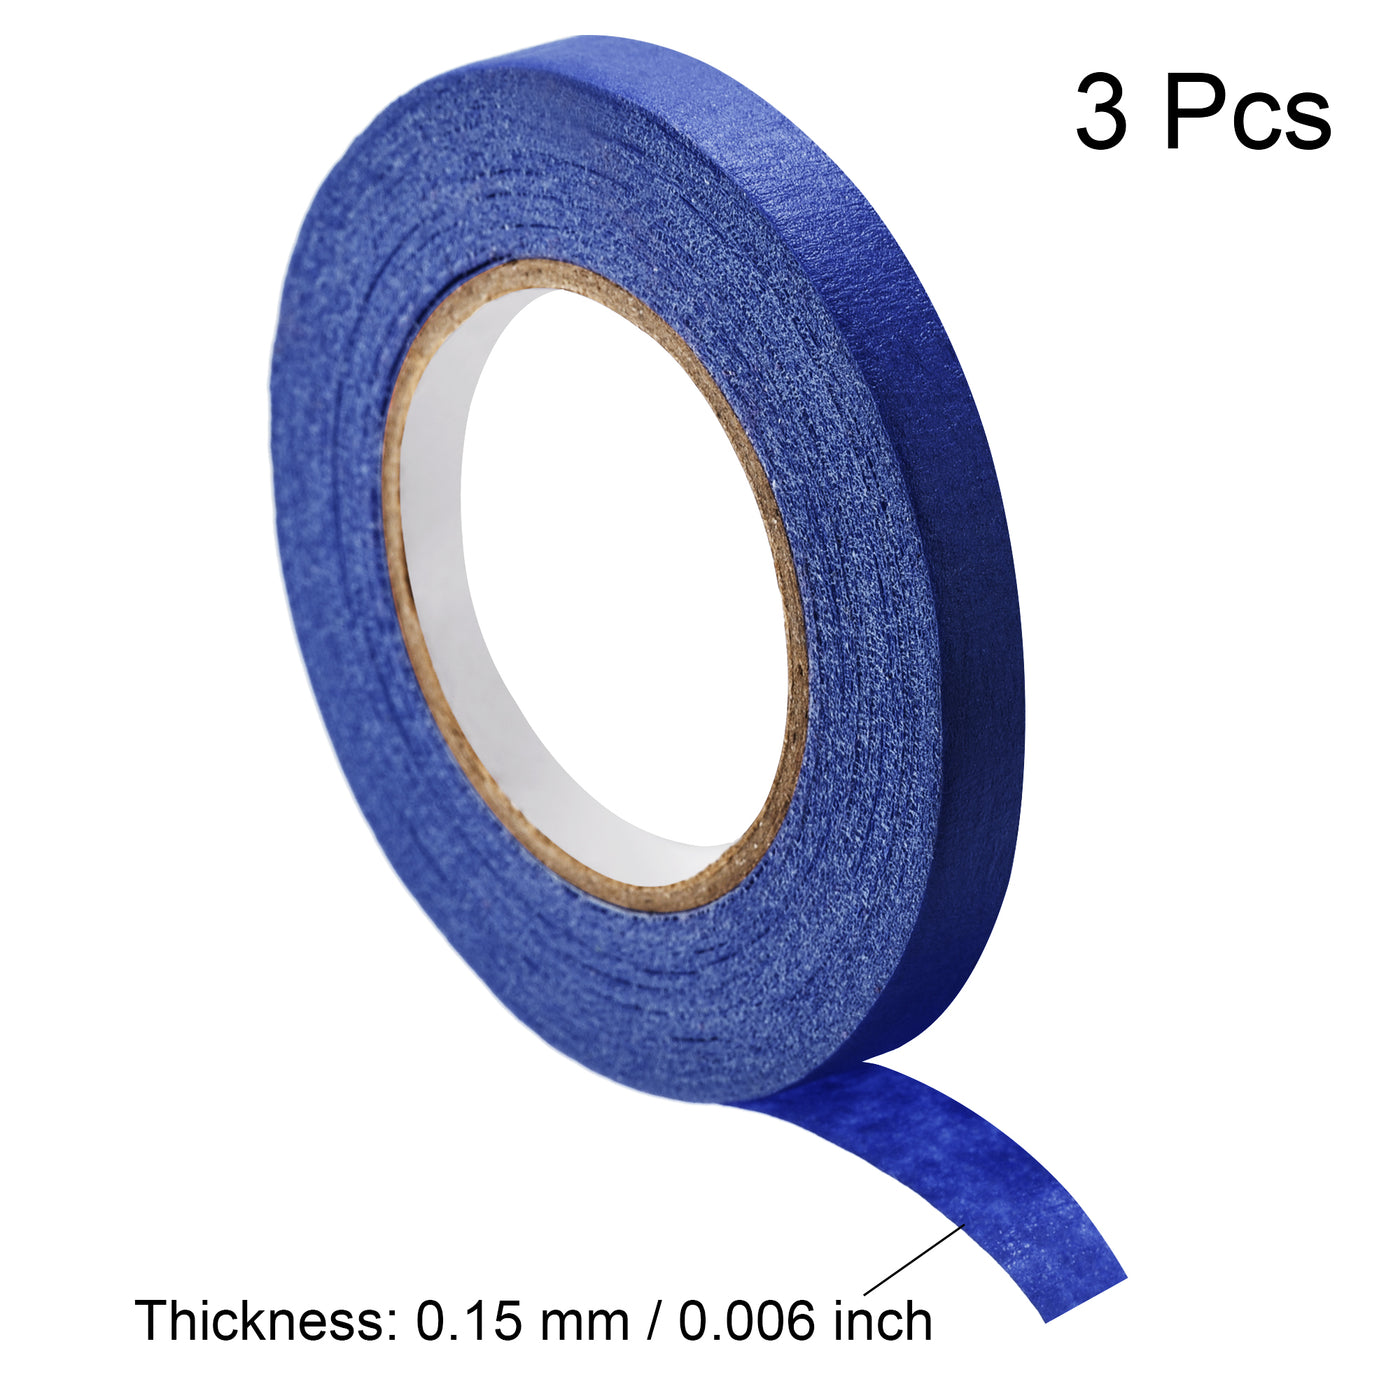 uxcell Uxcell 3Pcs 10mm 0.4 inch Wide 20m 21 Yards Masking Tape Painters Tape Rolls Dark Blue